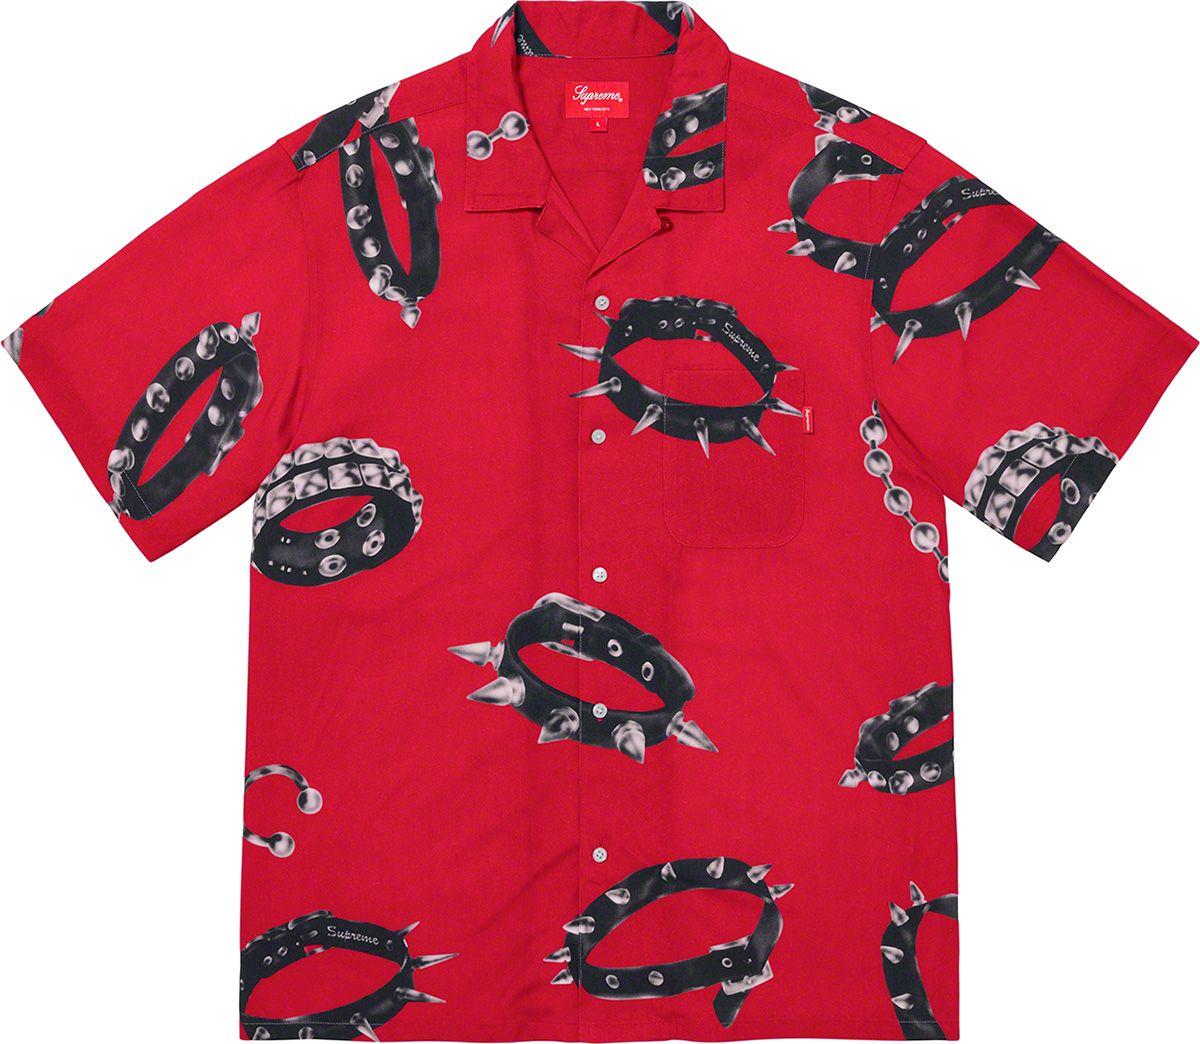 Penguins Rayon S/S Shirt - Fall/Winter 2020 Preview – Supreme